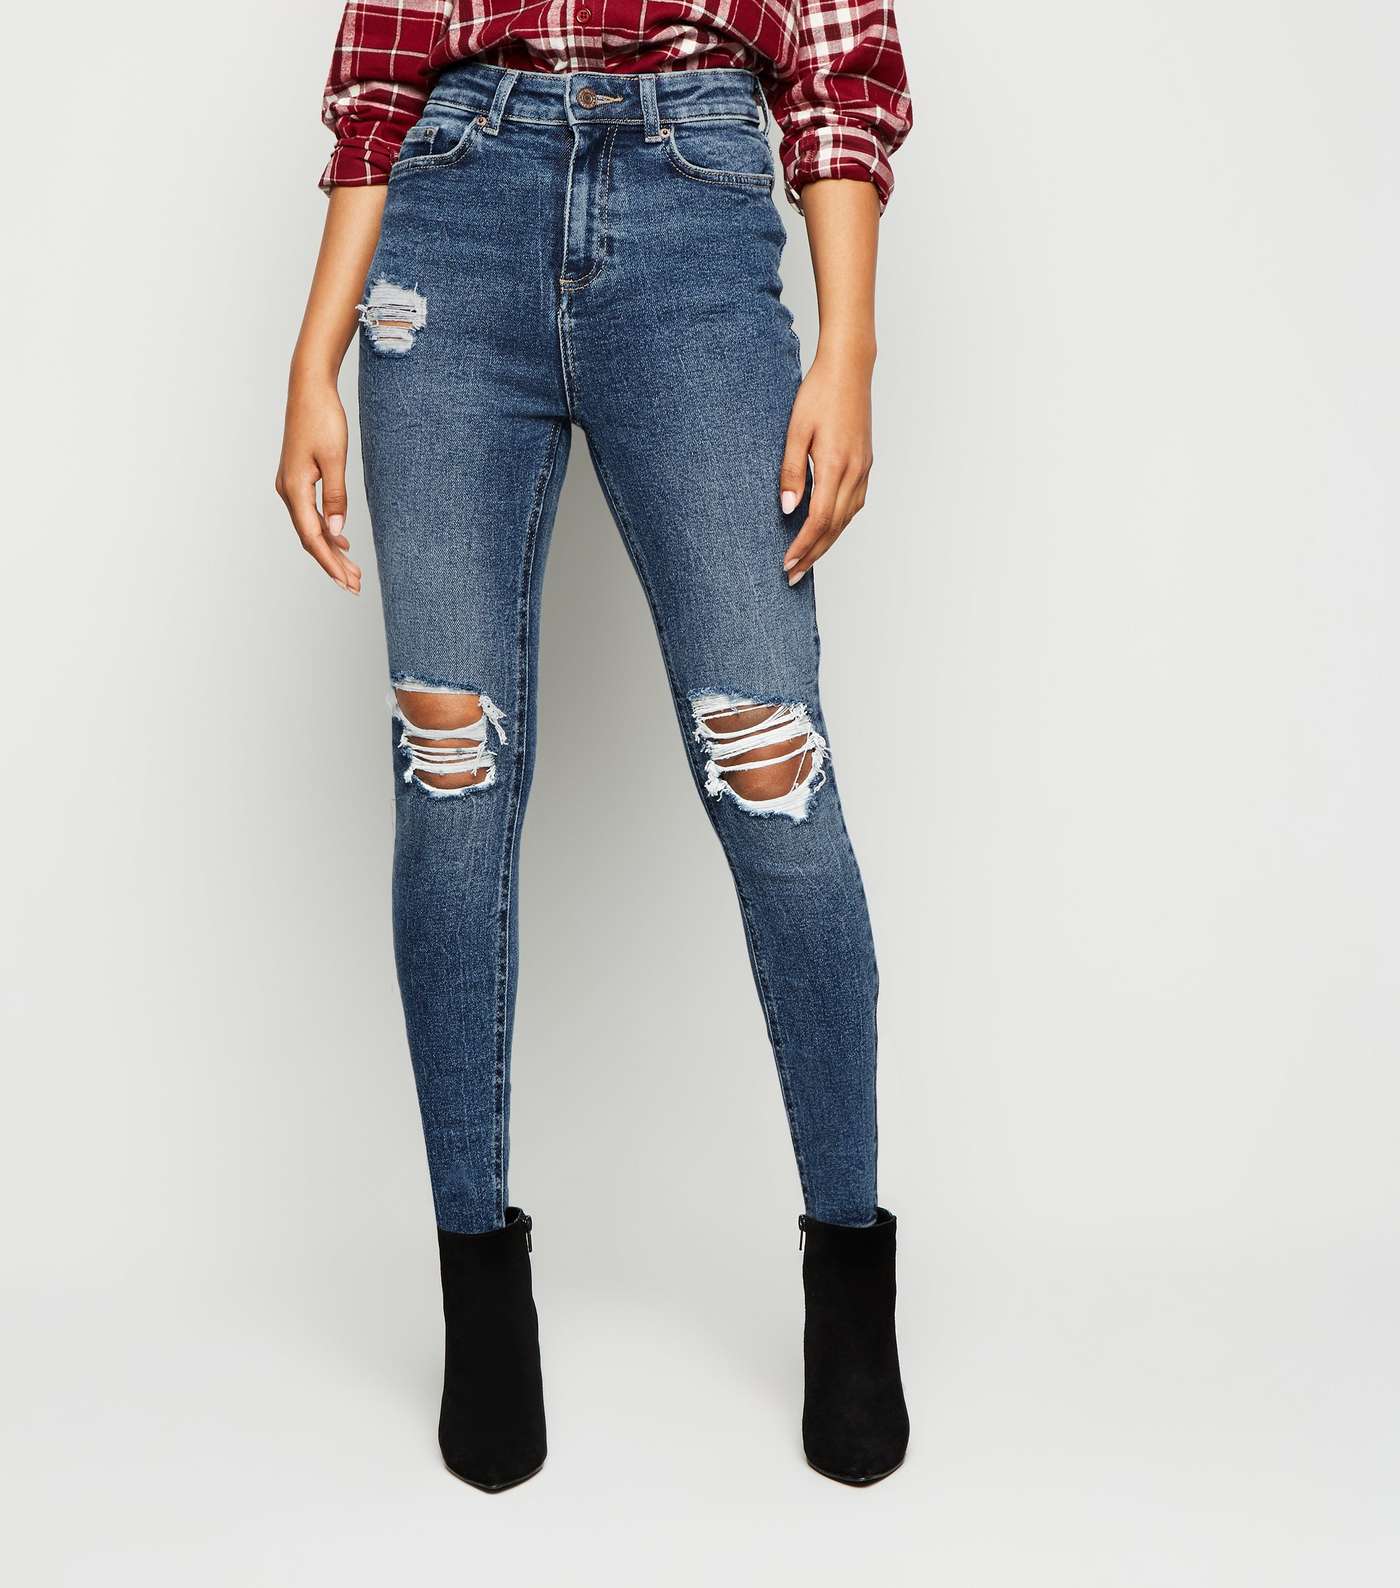 Petite Blue Ripped High Waist Super Skinny Jeans Image 2